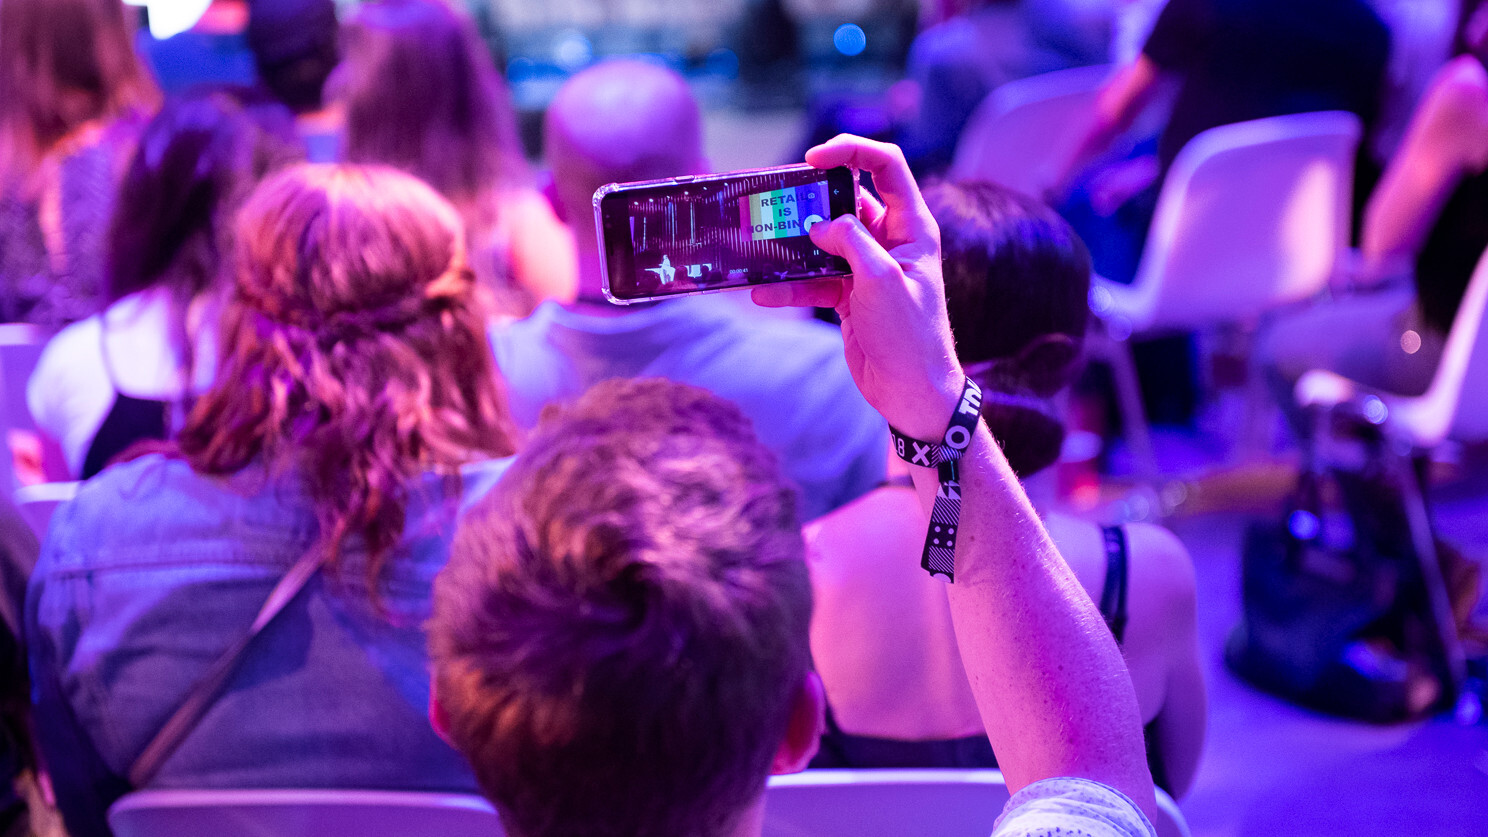 TNW2019 Daily: Our conference is your canvas